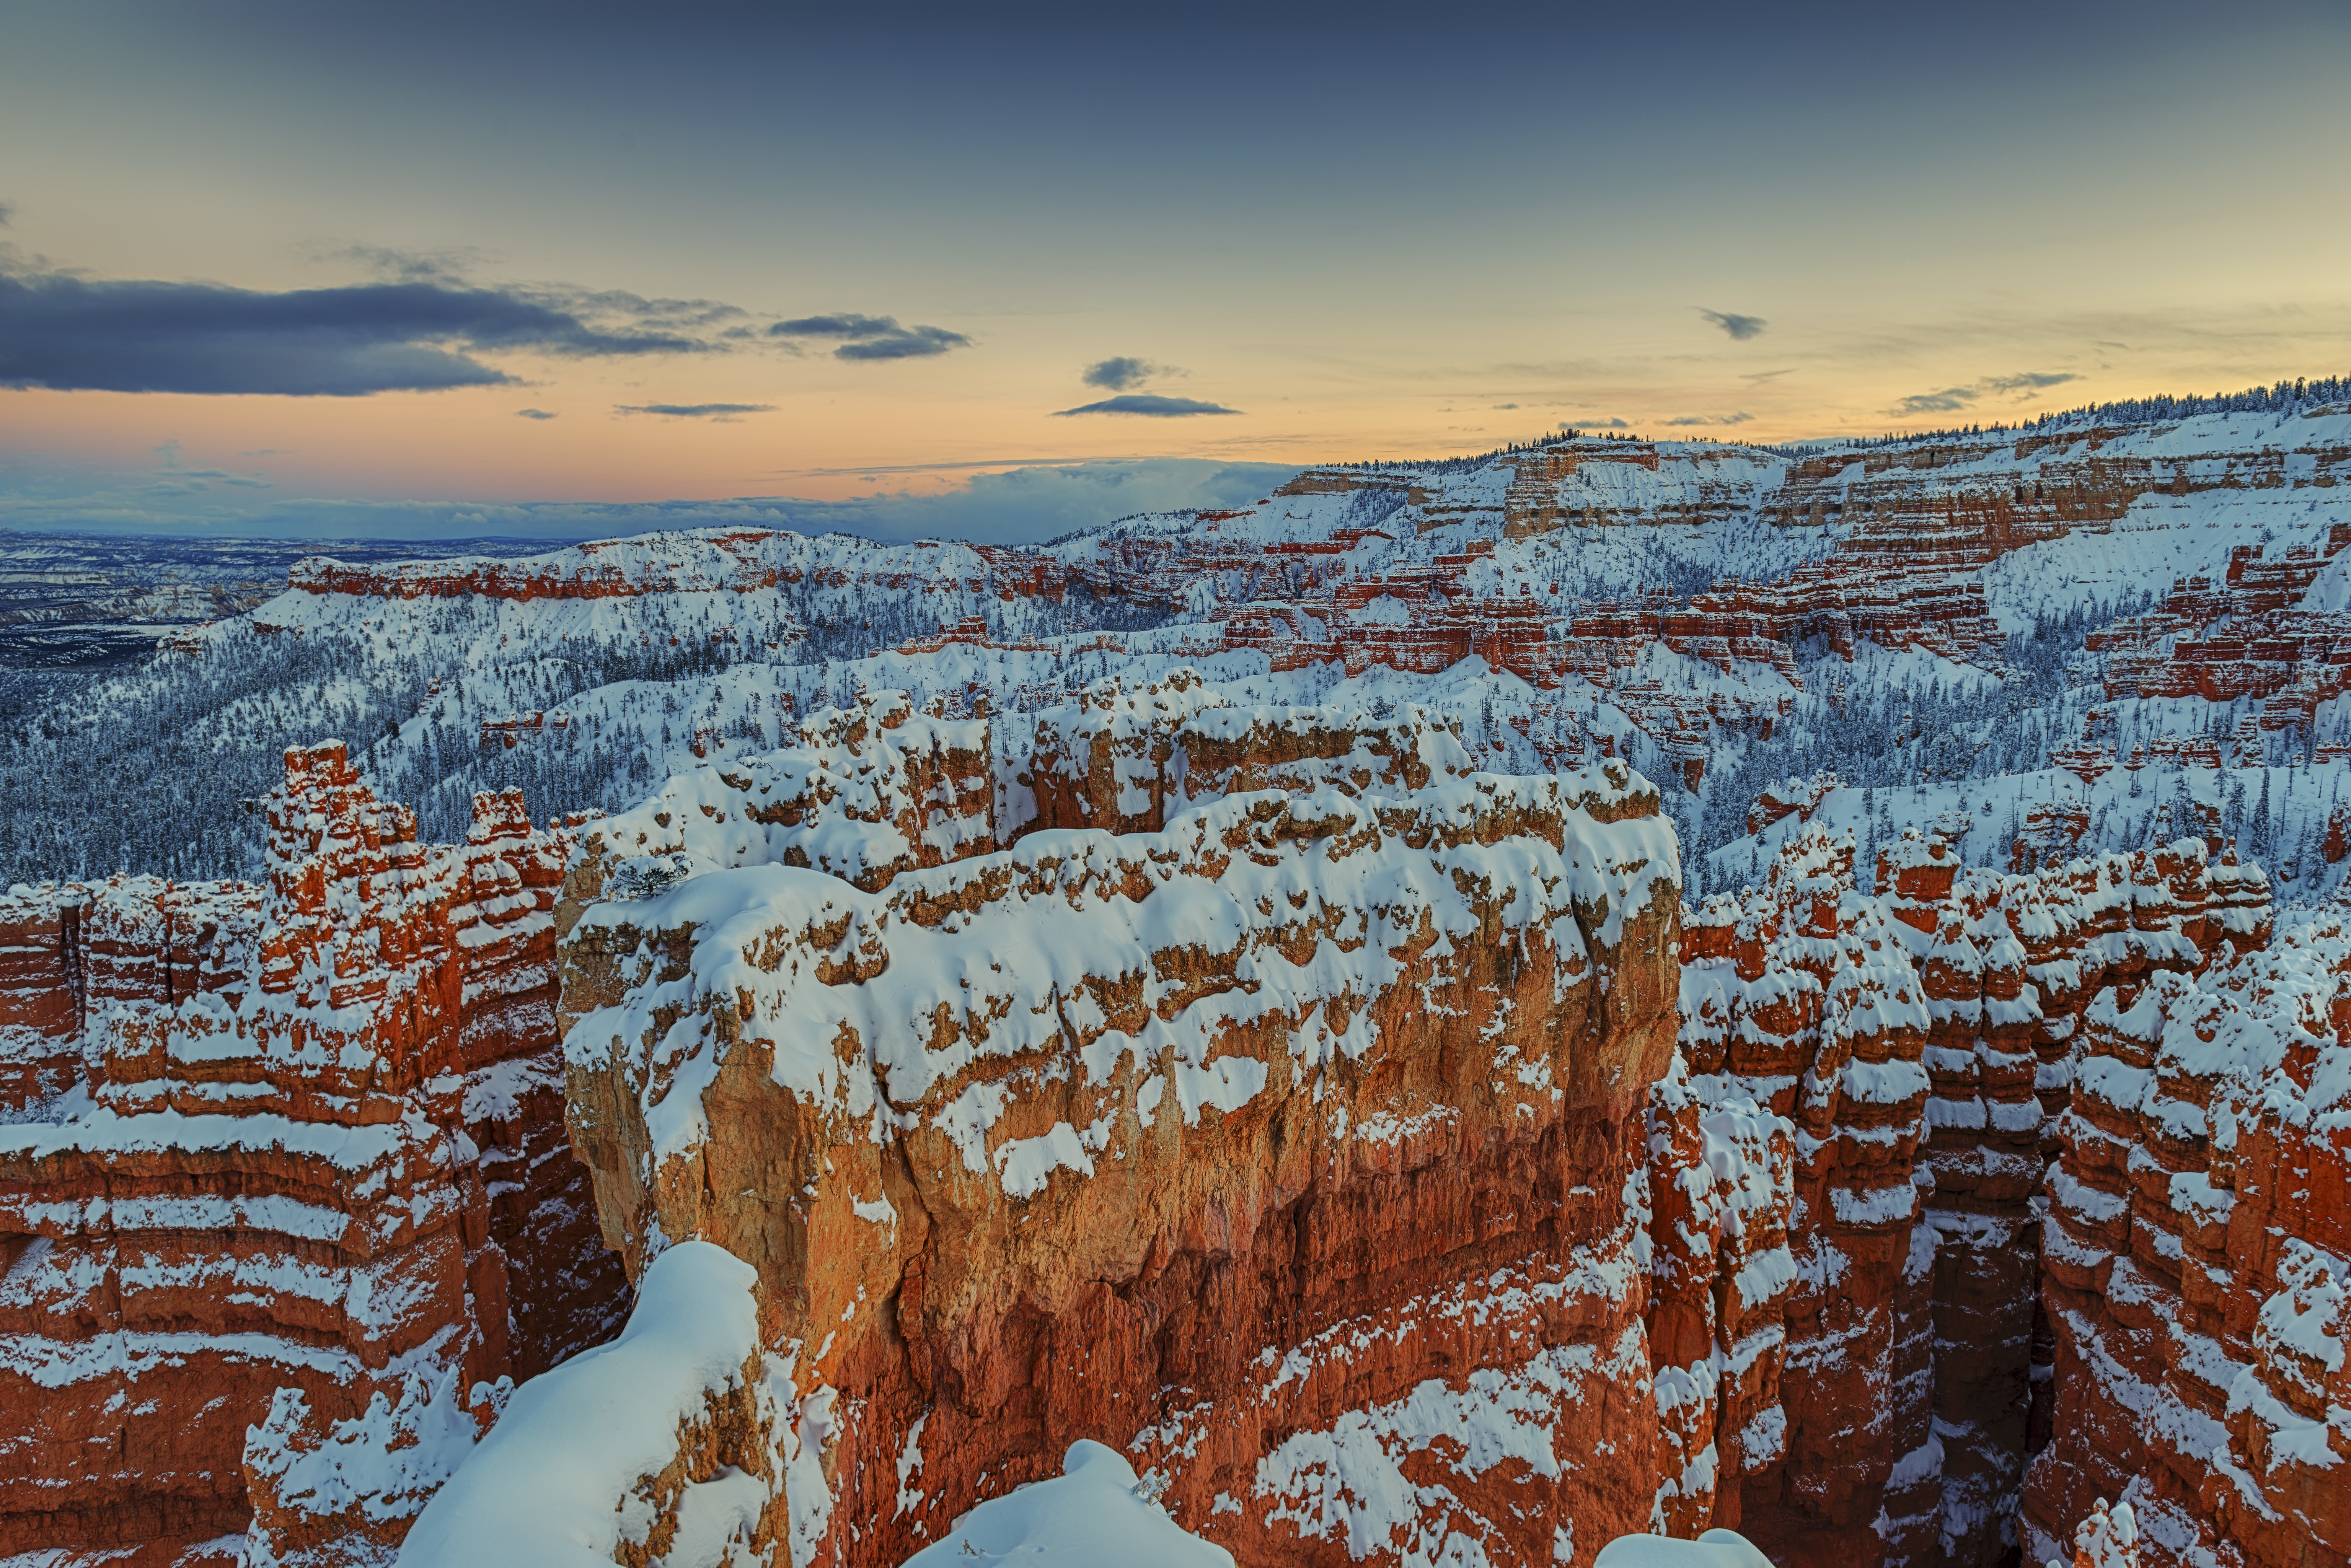 General 6144x4099 Bryce Canyon National Park landscape photography rock formation clouds sky sunset glow snow sunset nature